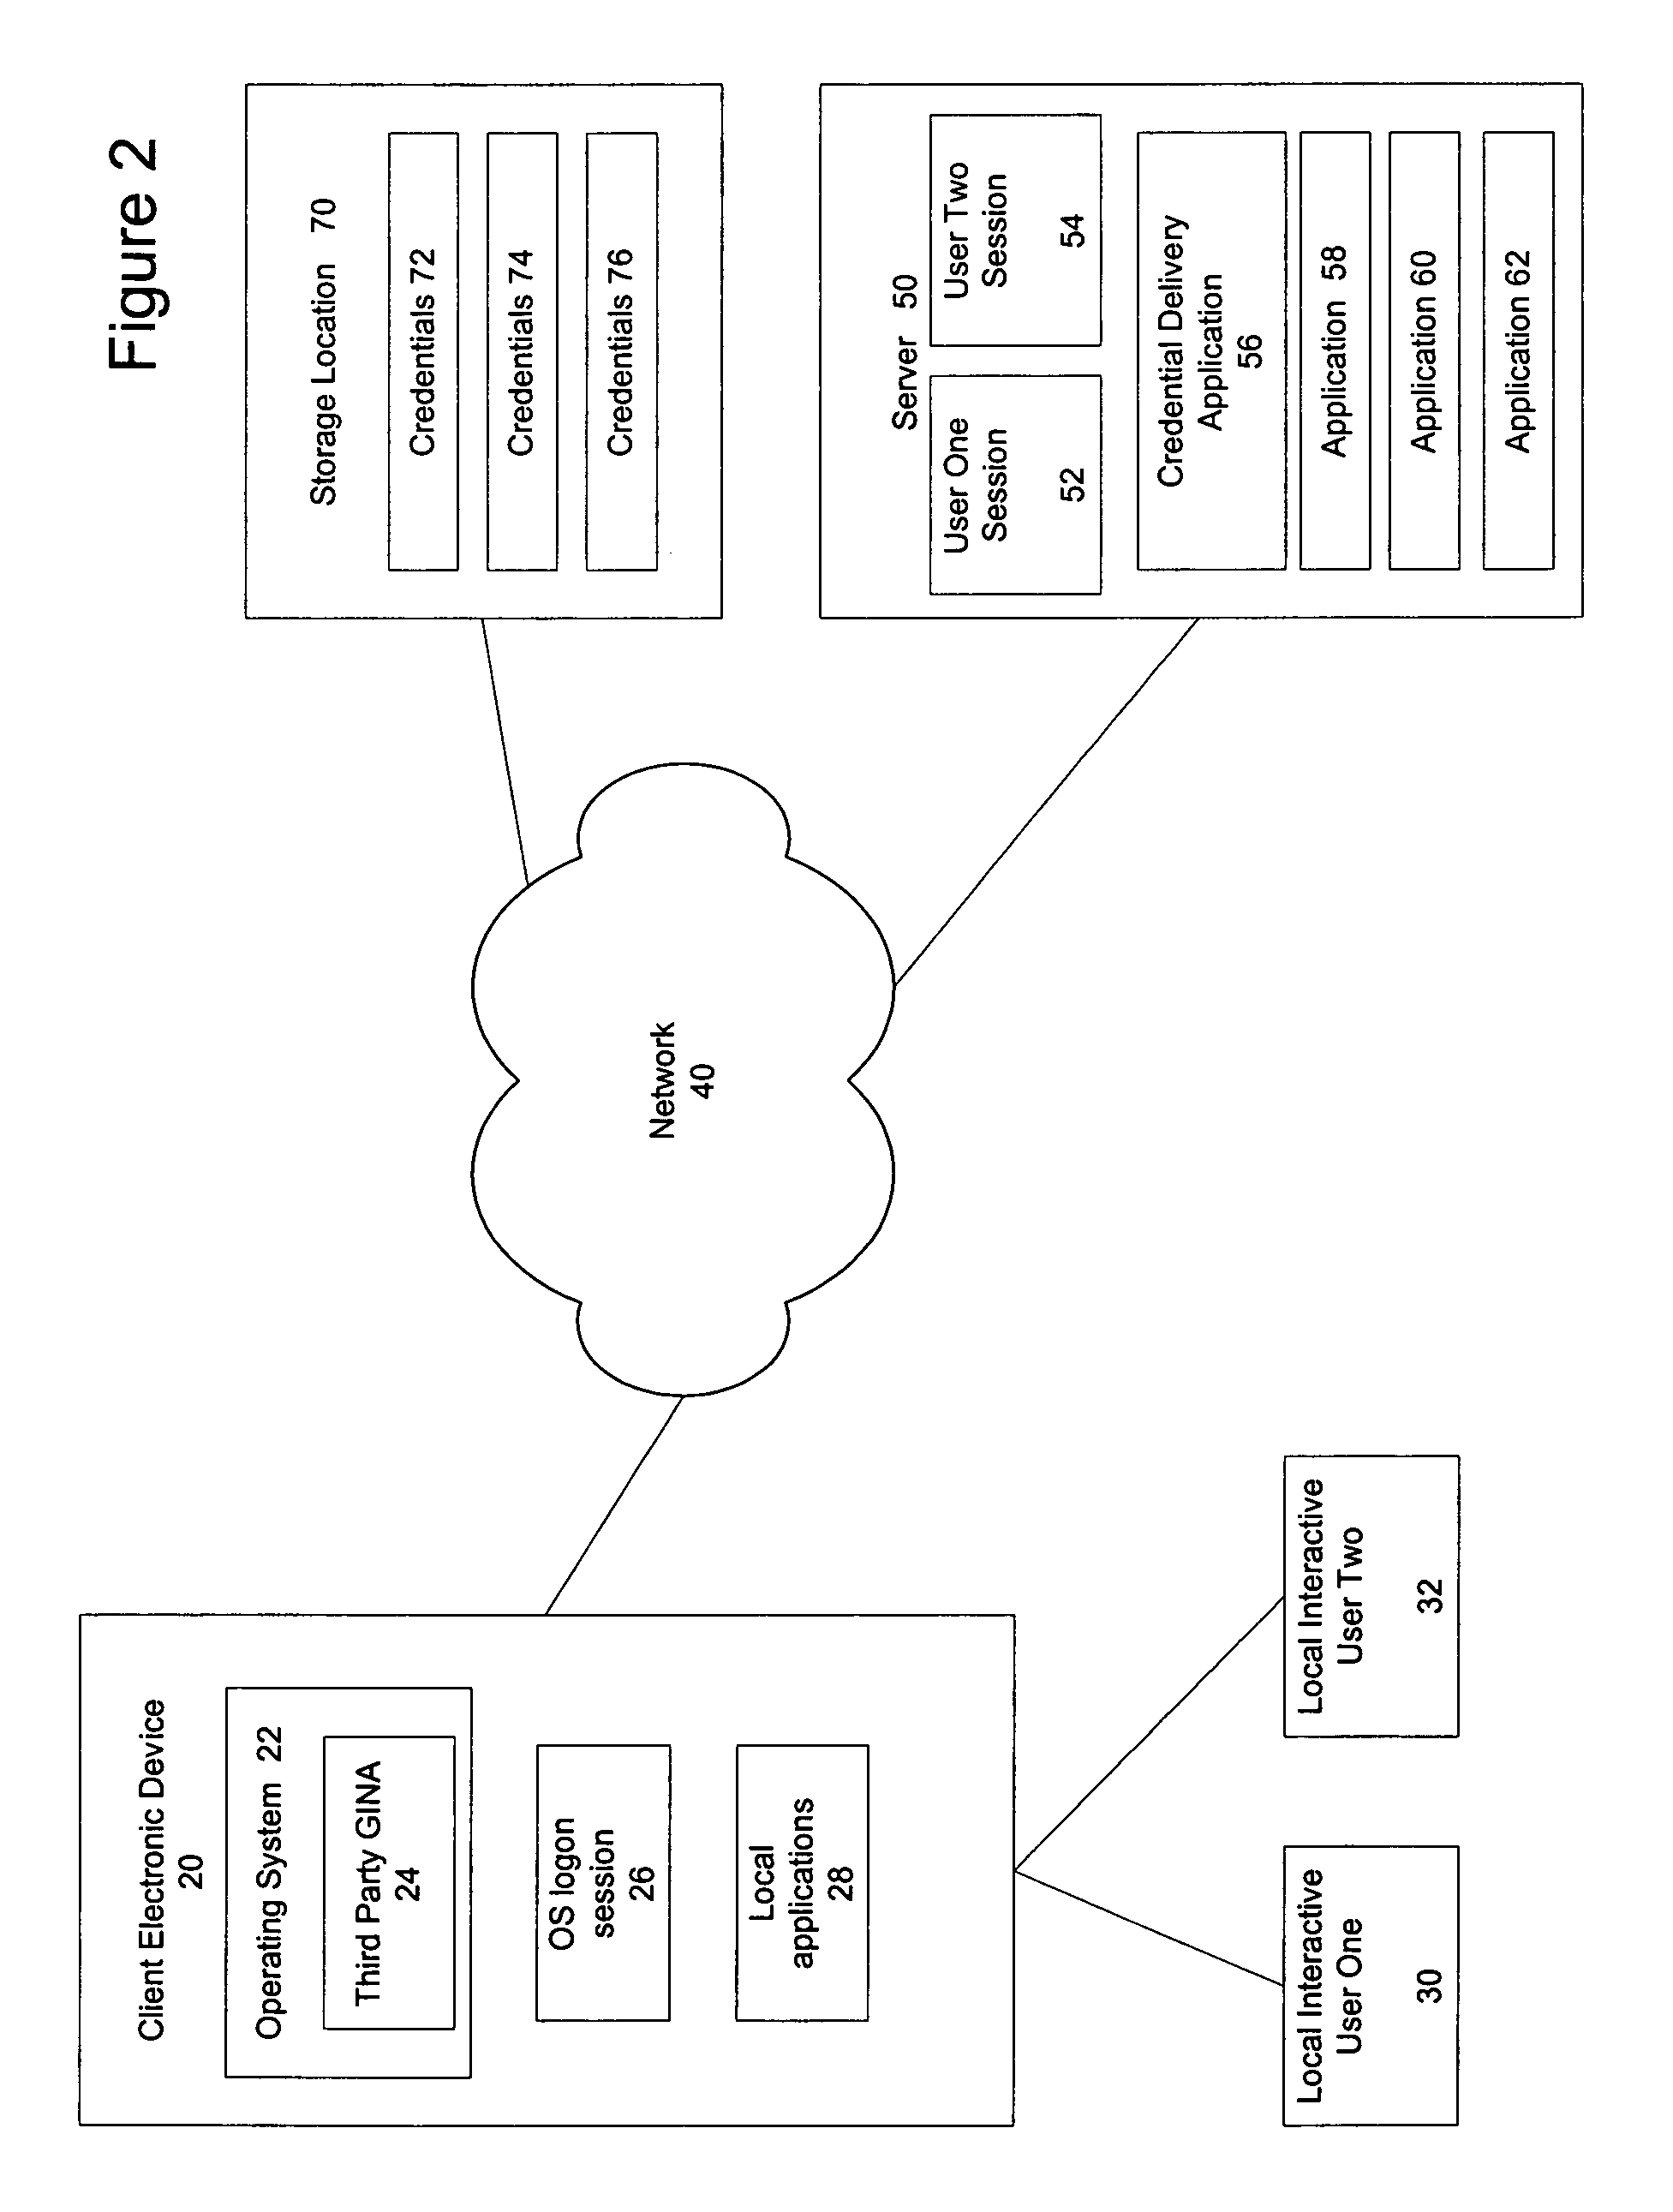 System and method for permission-based access using a shared account